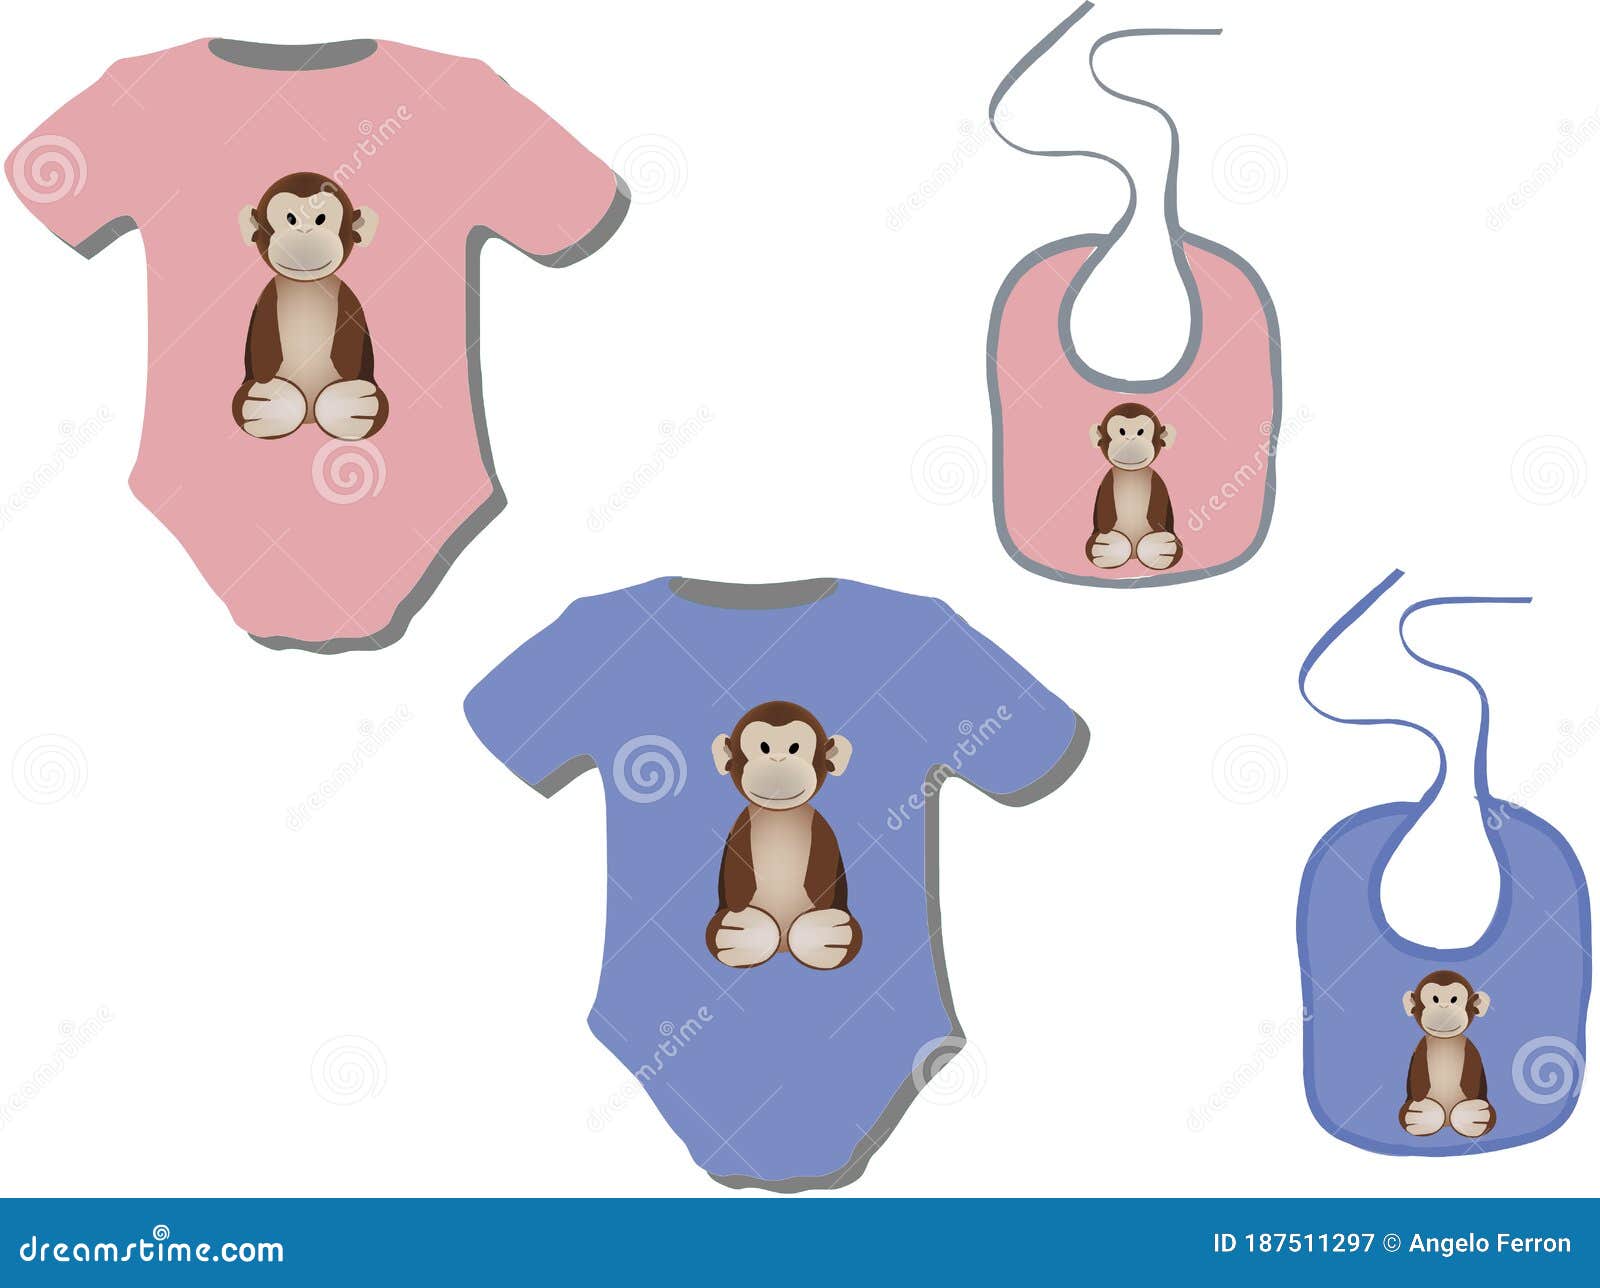 clothing from baby boy and girl